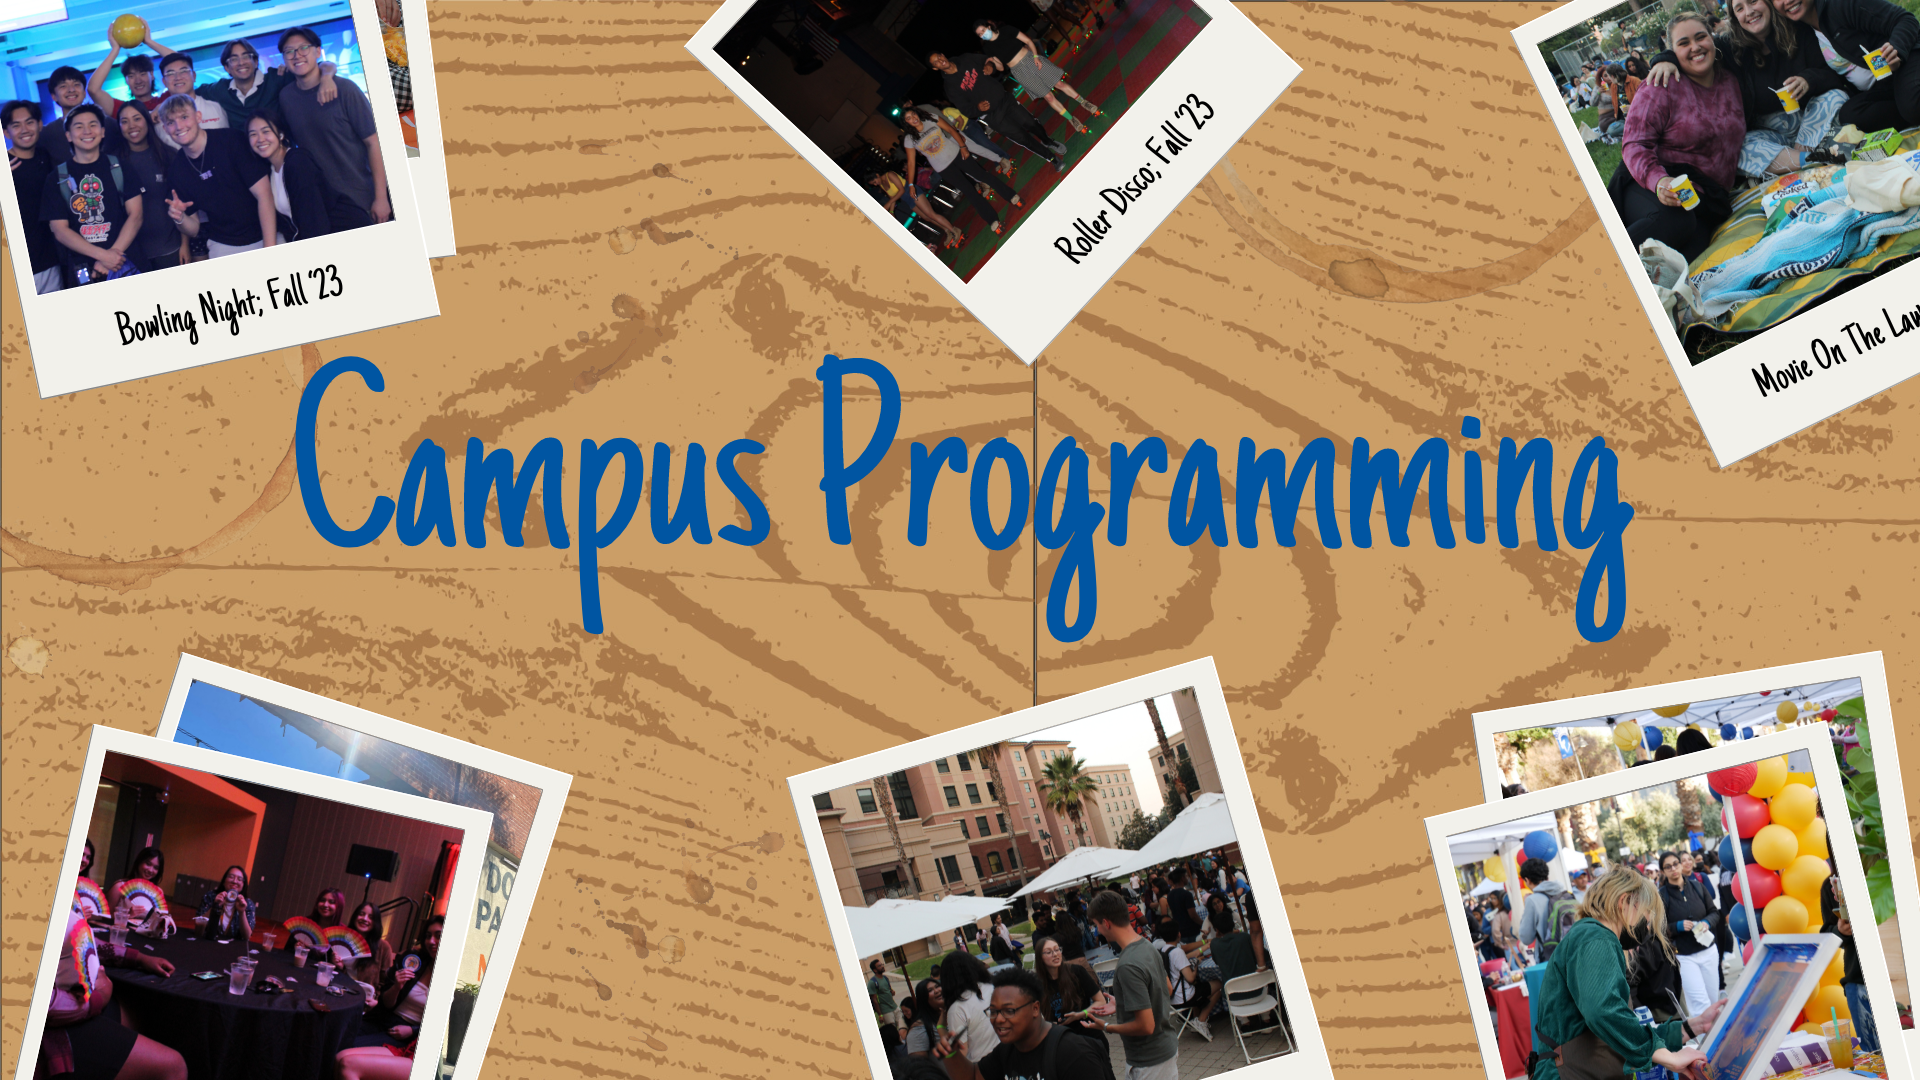 Campus Programming graphic with snapshots of students at various campus events